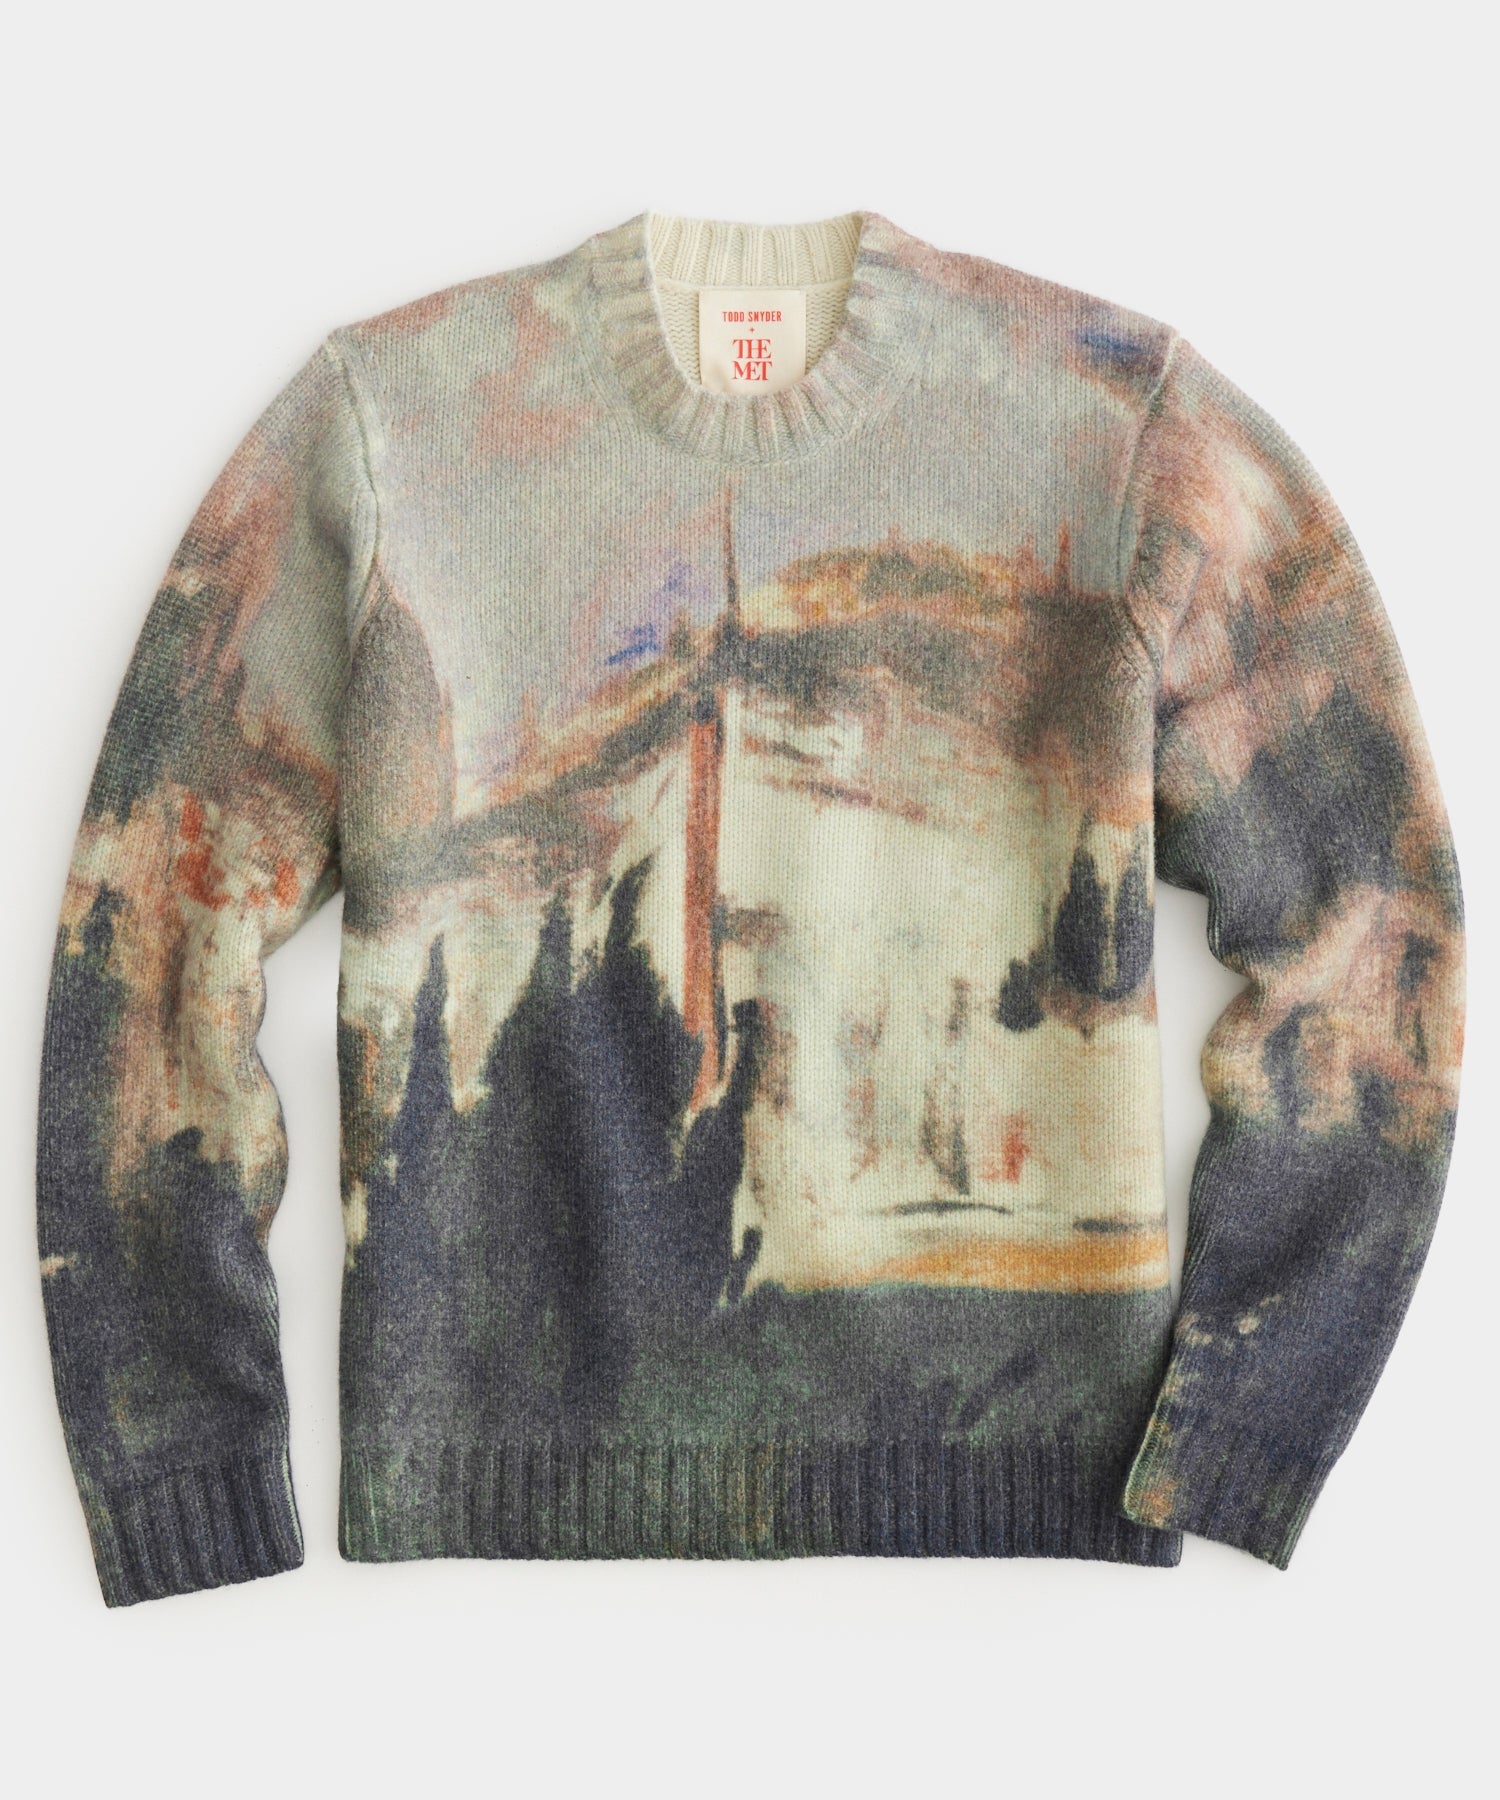 Todd Snyder x The Met Manet The Funeral Sweater